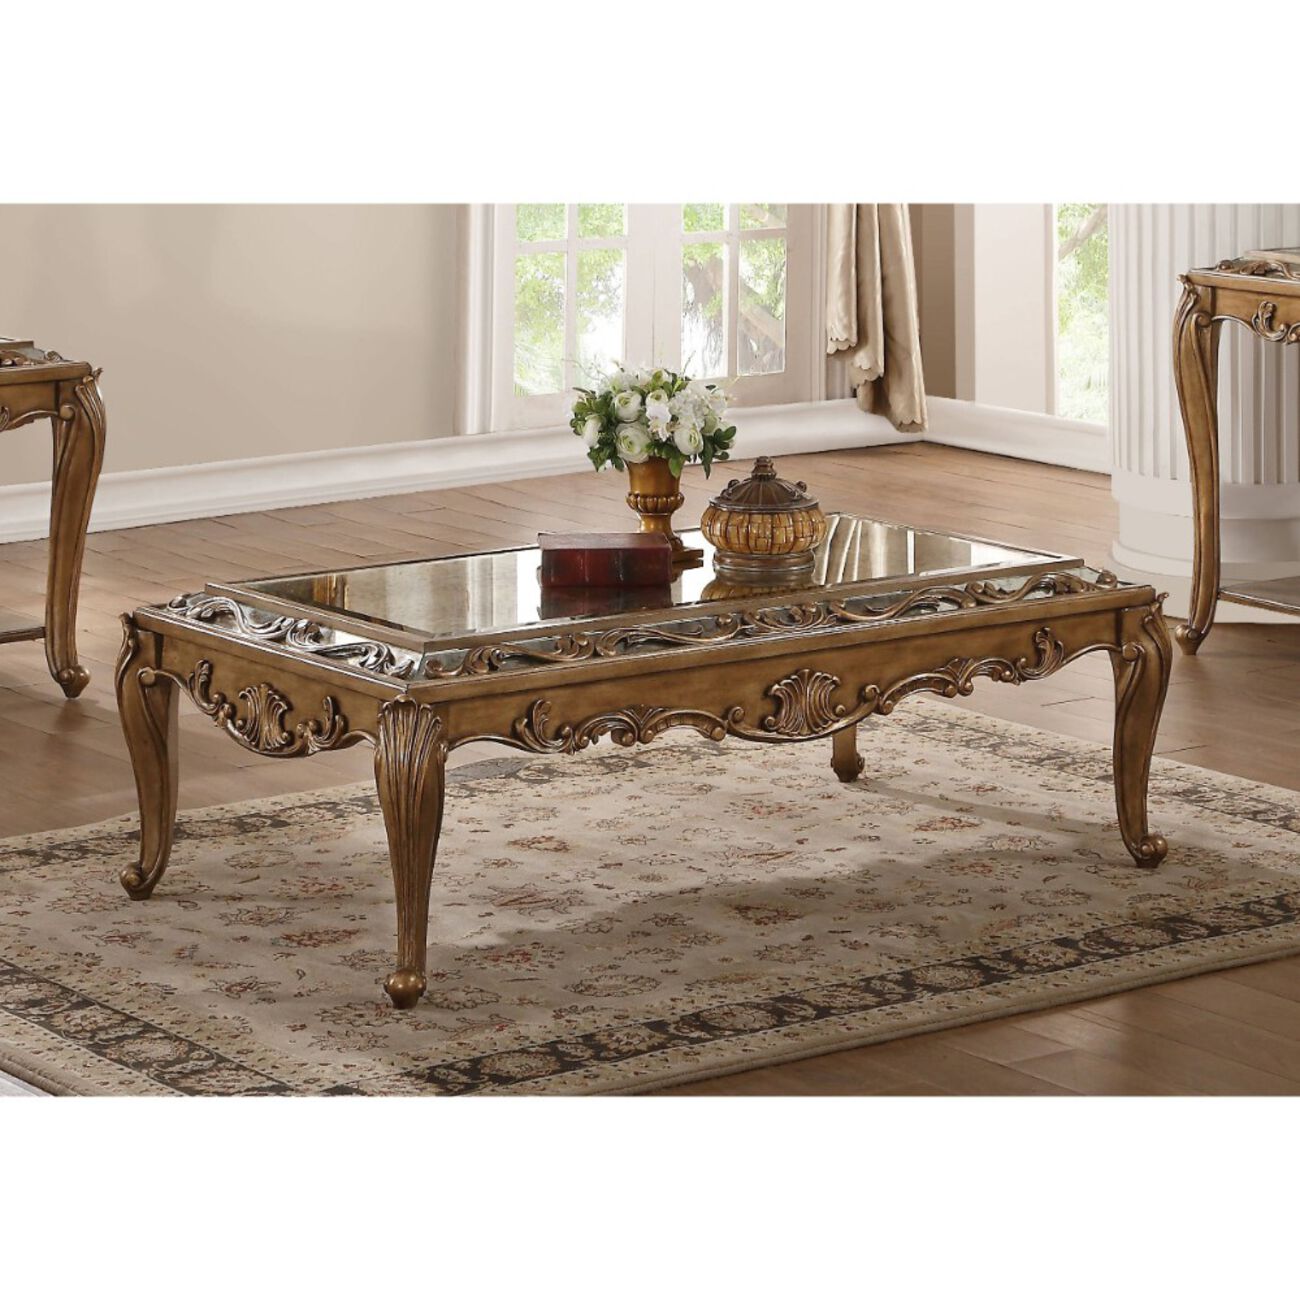 Traditional Rectangular Wooden Coffee Table With Mirrored Top, Gold